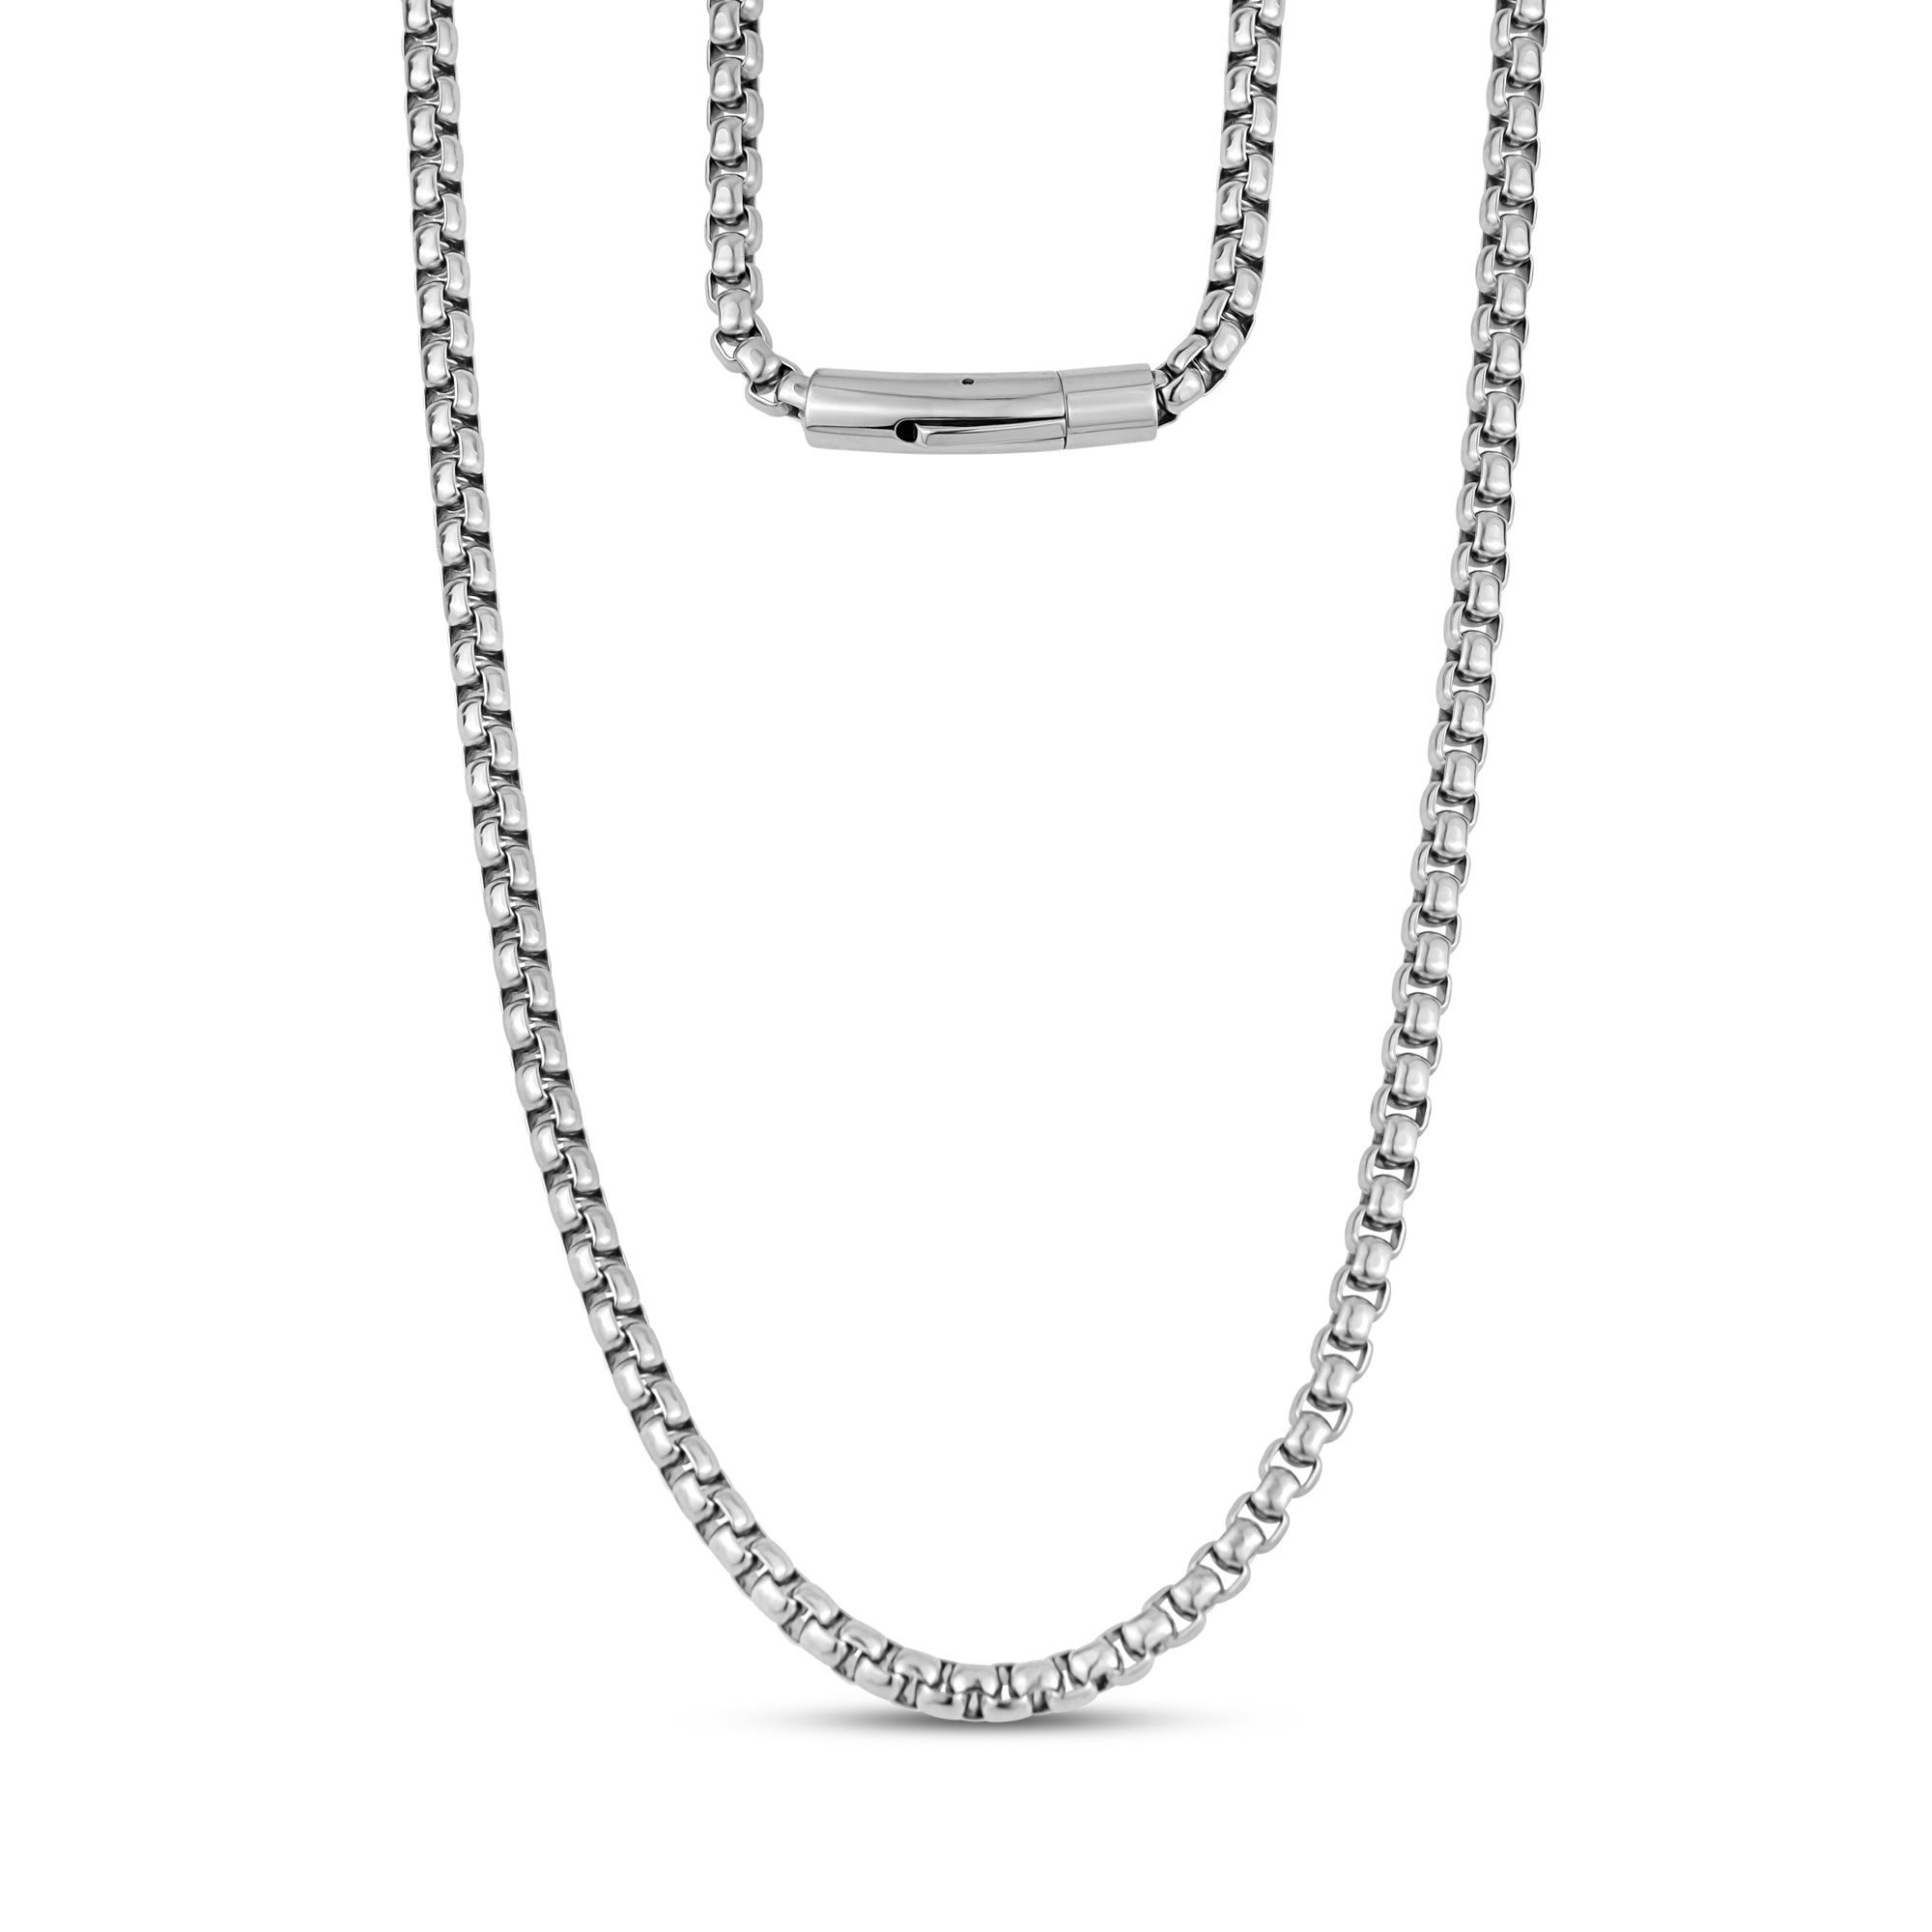 Urban Jewelry Ultra Thick and Wide Stainless Steel Men's Chain Necklace (19  inches) | Amazon.com